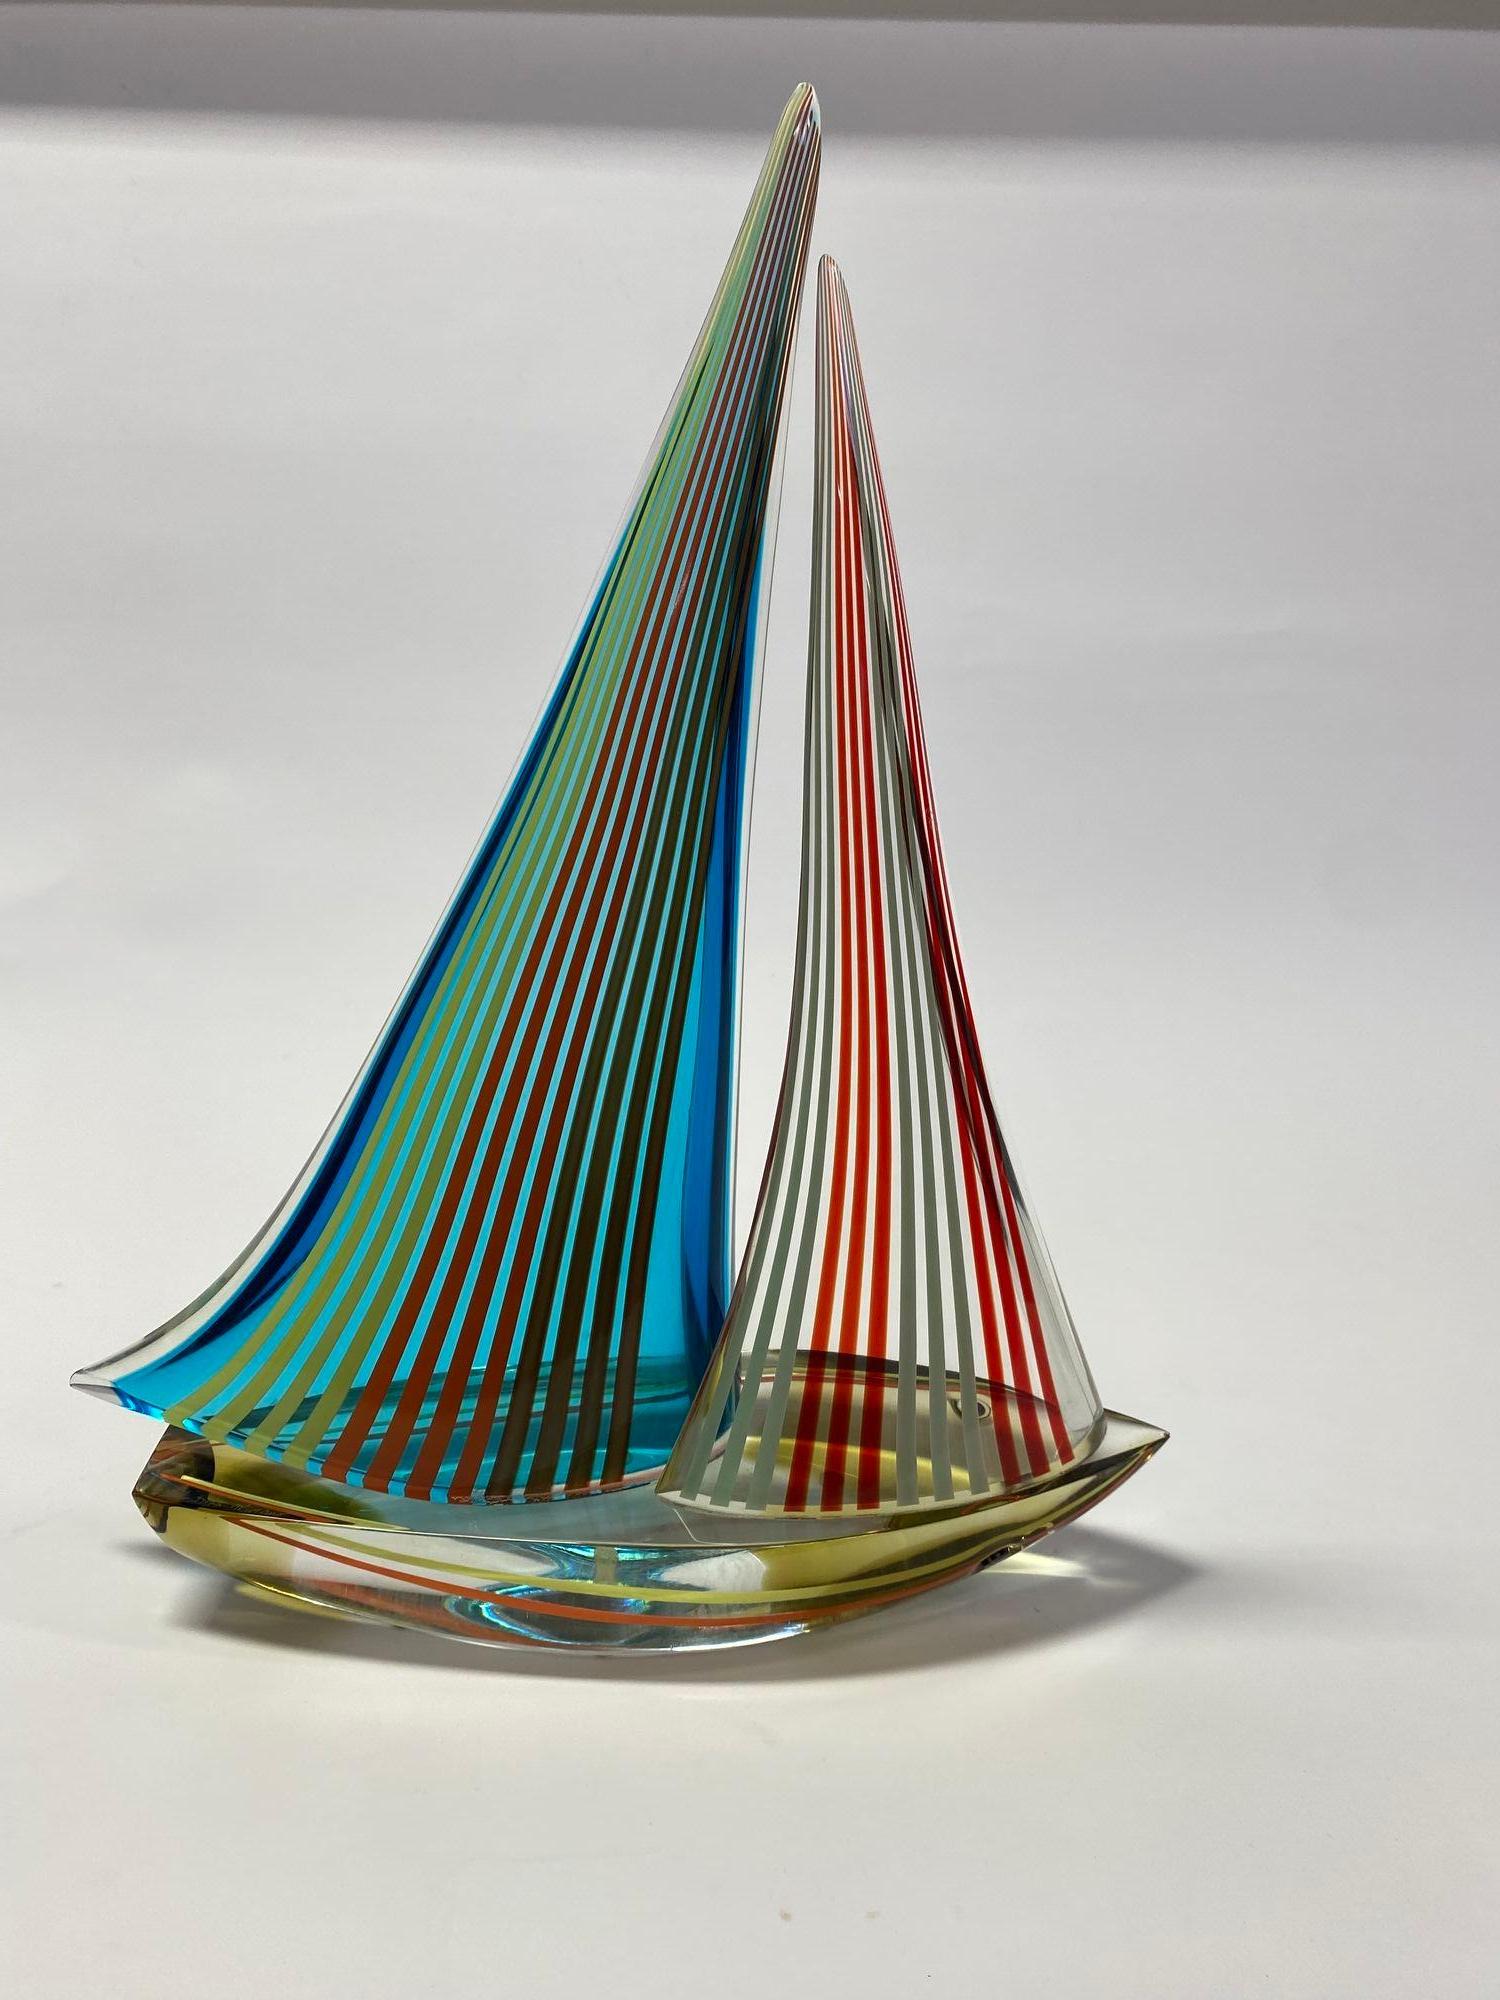 Vintage Italian double sail boat hand blown and crafted in multi color Murano glass by Alberto Dona' Signed “Alberto Dona” on the base / Made in Italy in the 1980’s Height: 21 inches / Width: 17 inches / Depth: 6 inches.